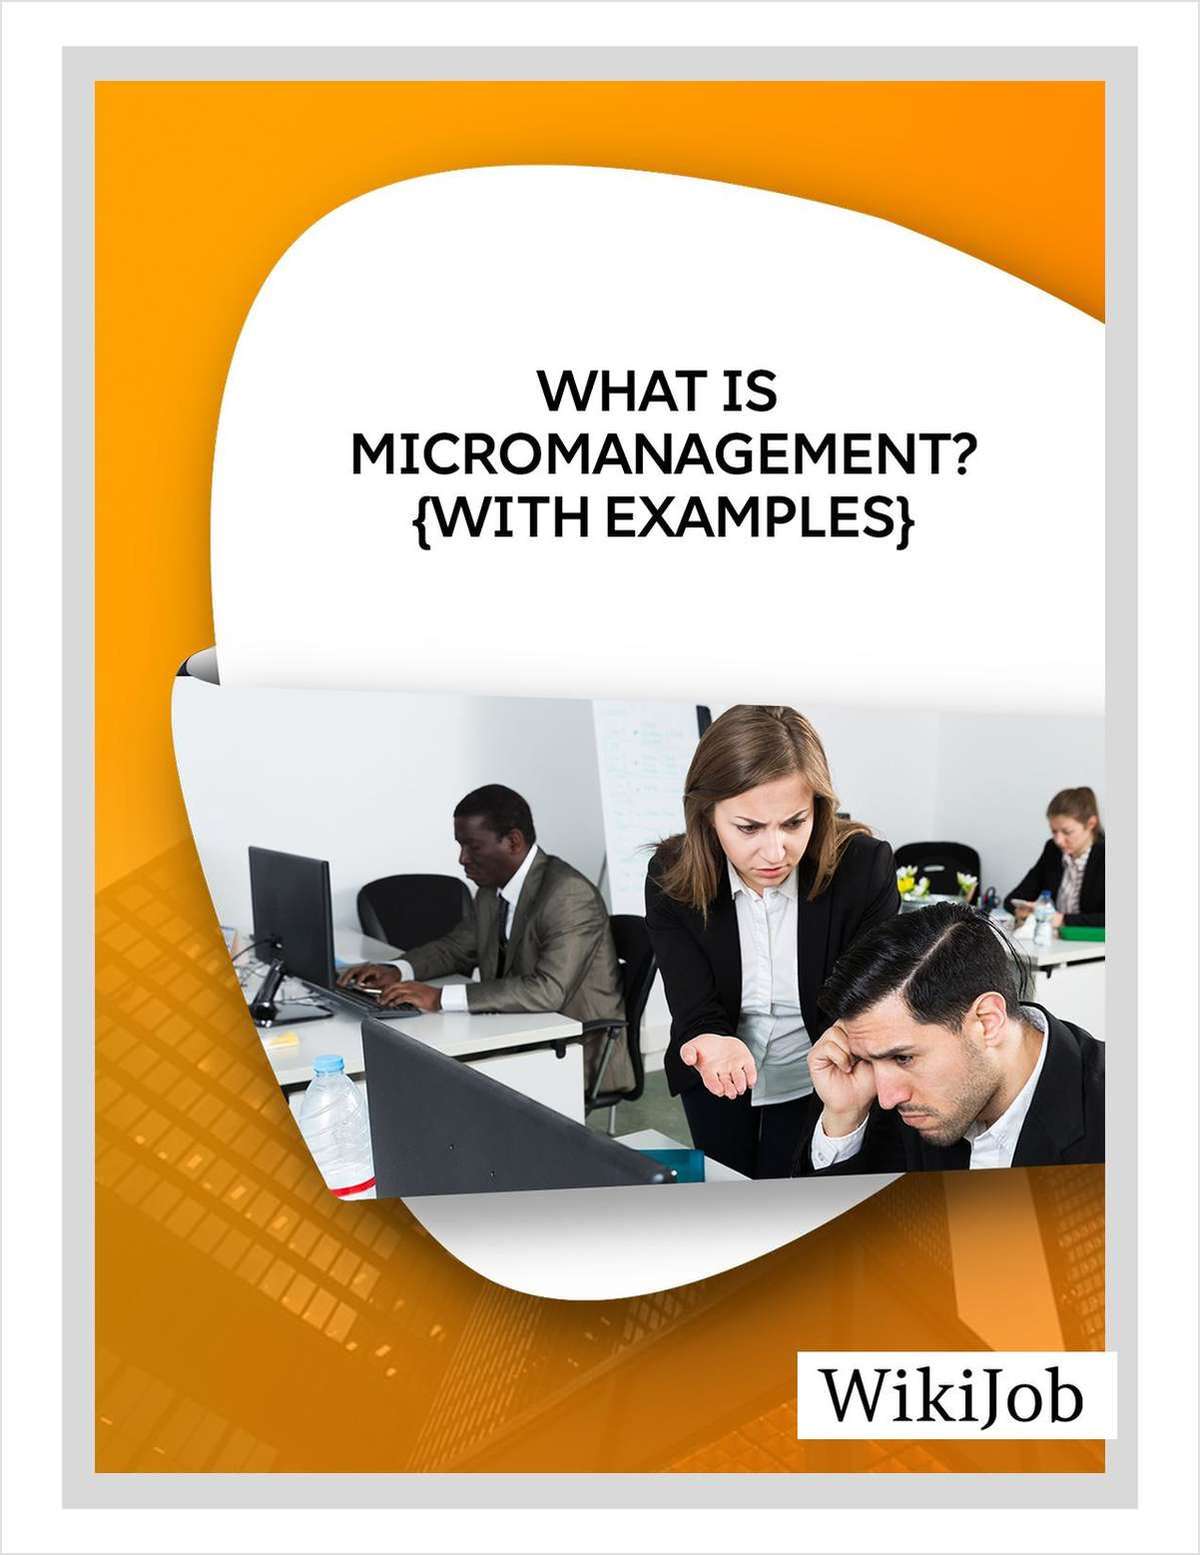 What Is Micromanagement?